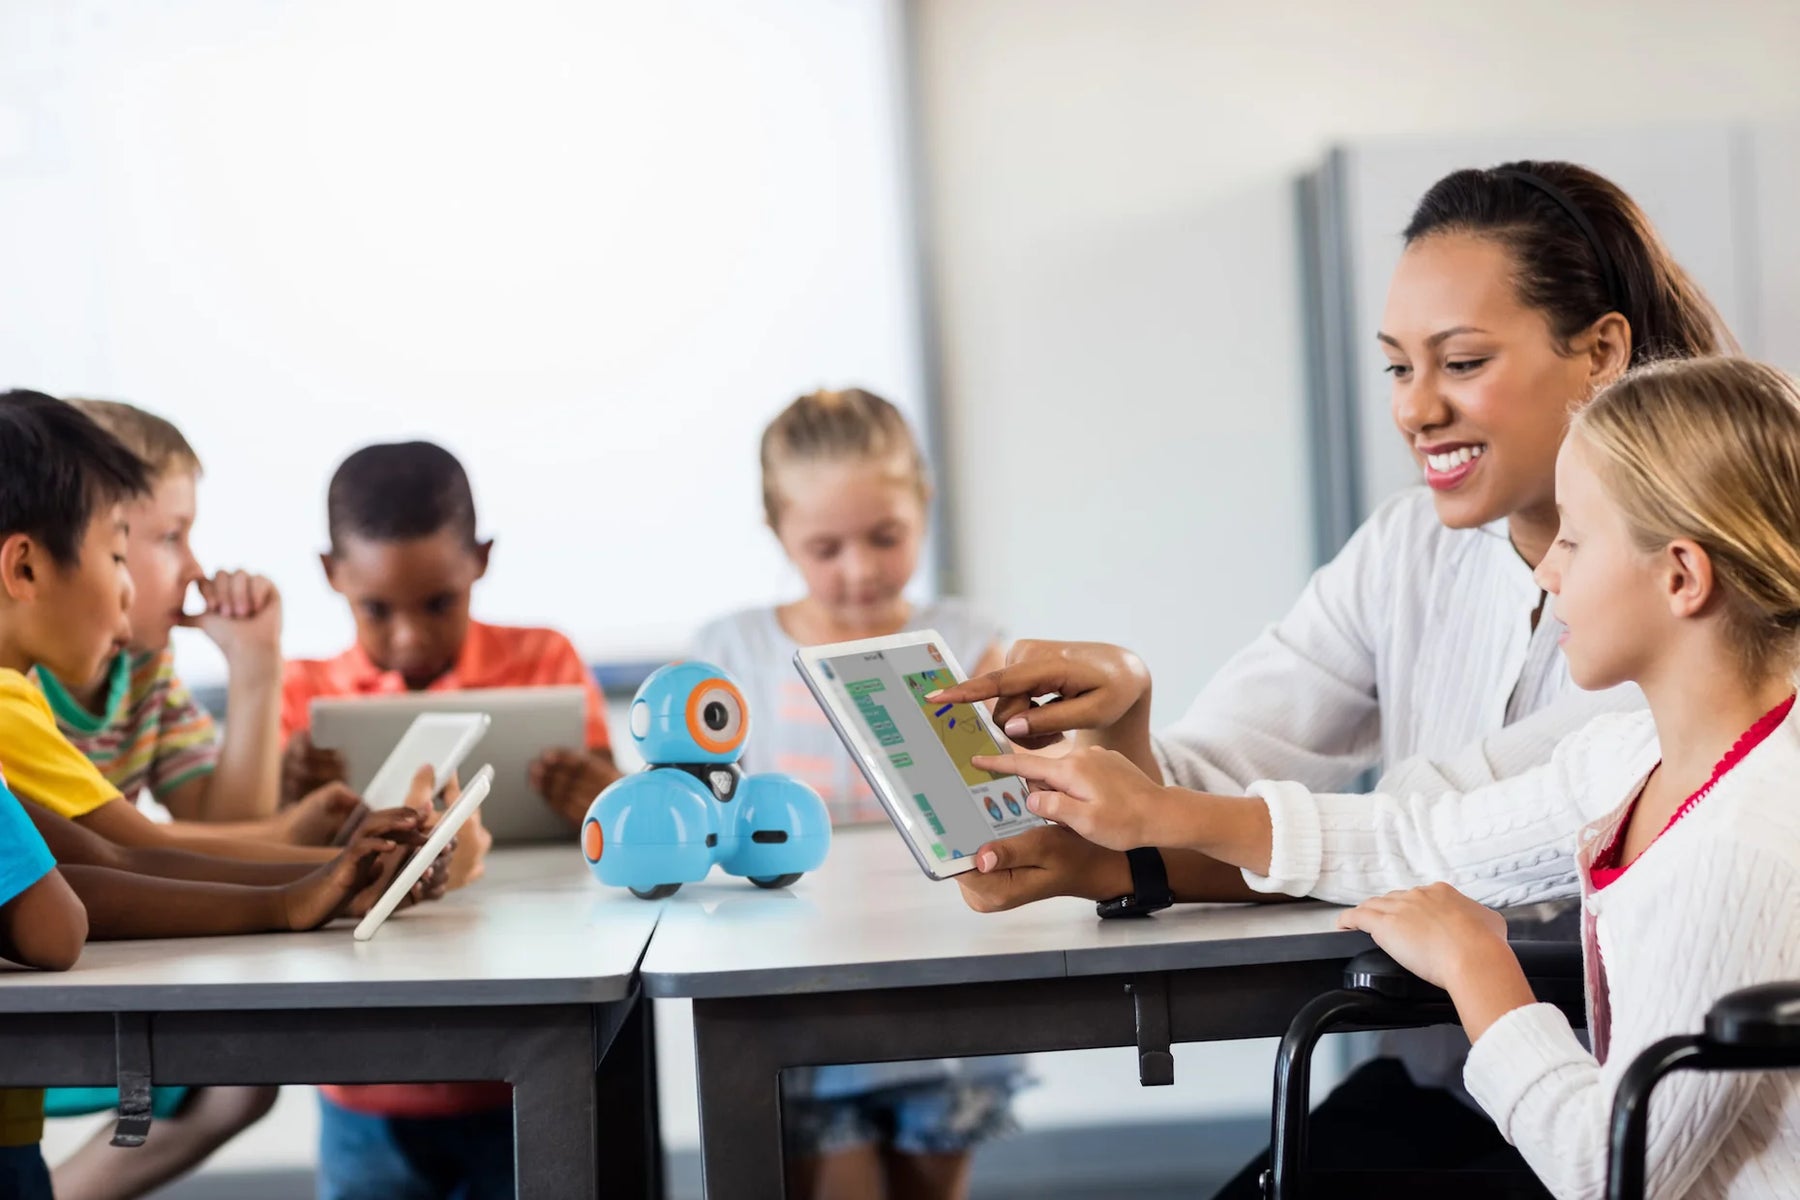 Teq - Clever robots Dash, Dot, and Cue inspire students to creatively code  and problem solve. #MakeWonder with the Wonder Workshop robots - now at  Teq! Learn more here